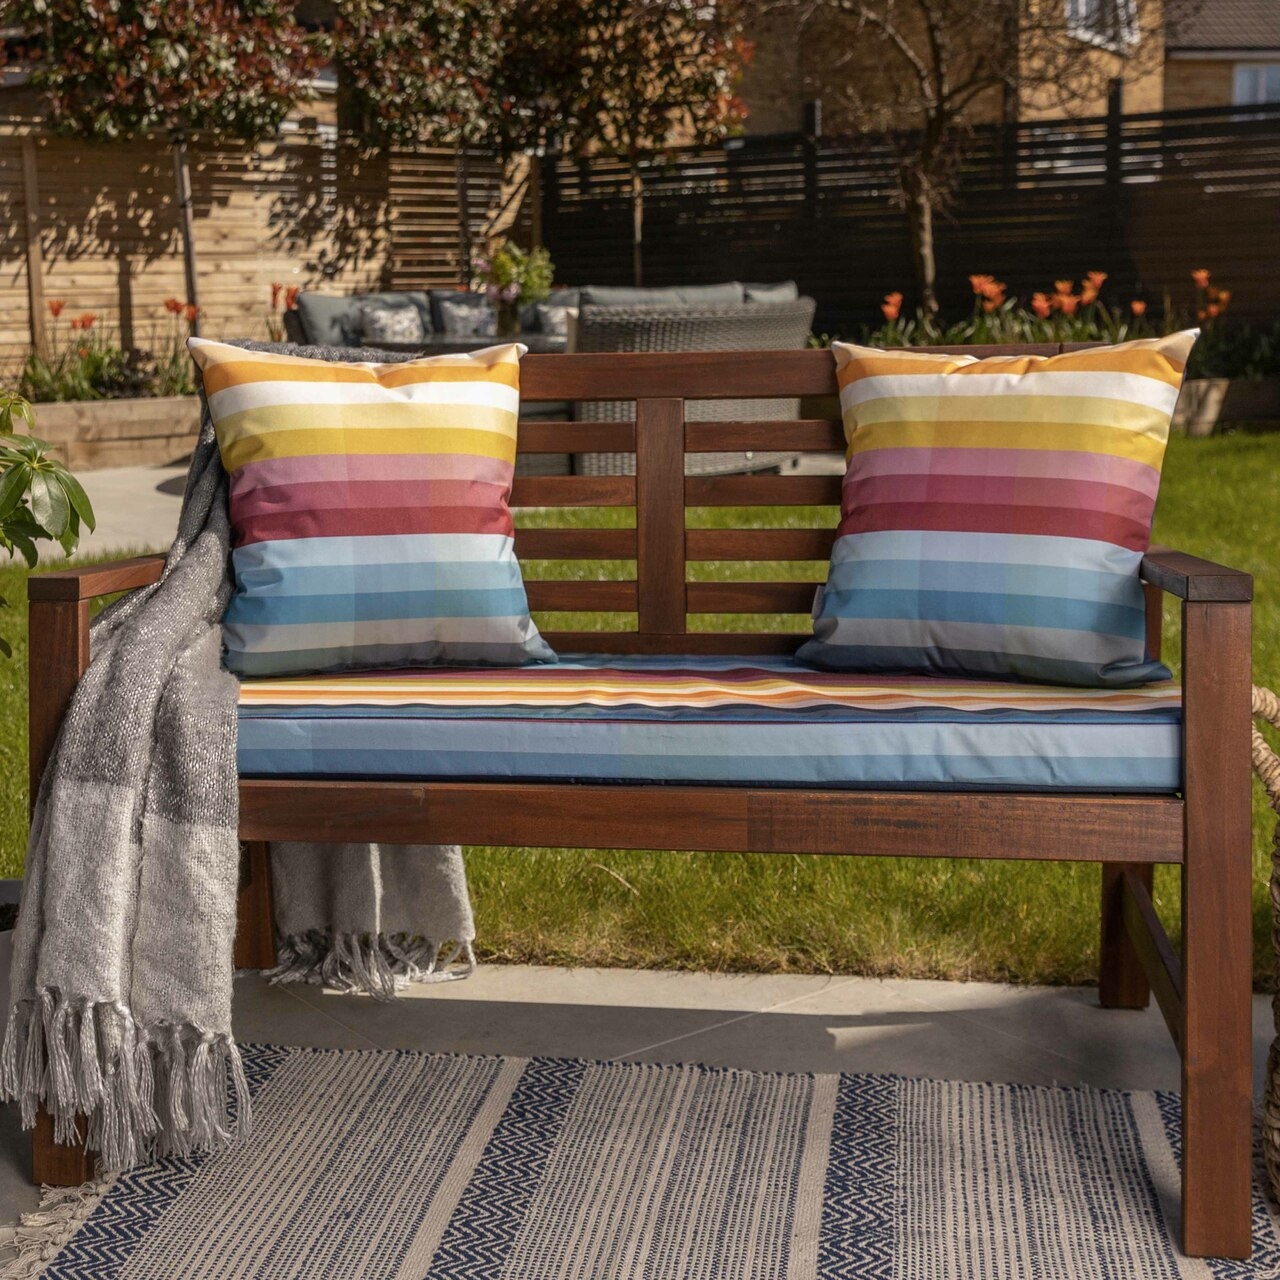 Celina Digby Luxury Water Resistant Garden Outdoor Bench Seat Pad – Pixel Stripes (Available in 2-Seater or 3-Seater Size) (144cm x 54cm 6cm)